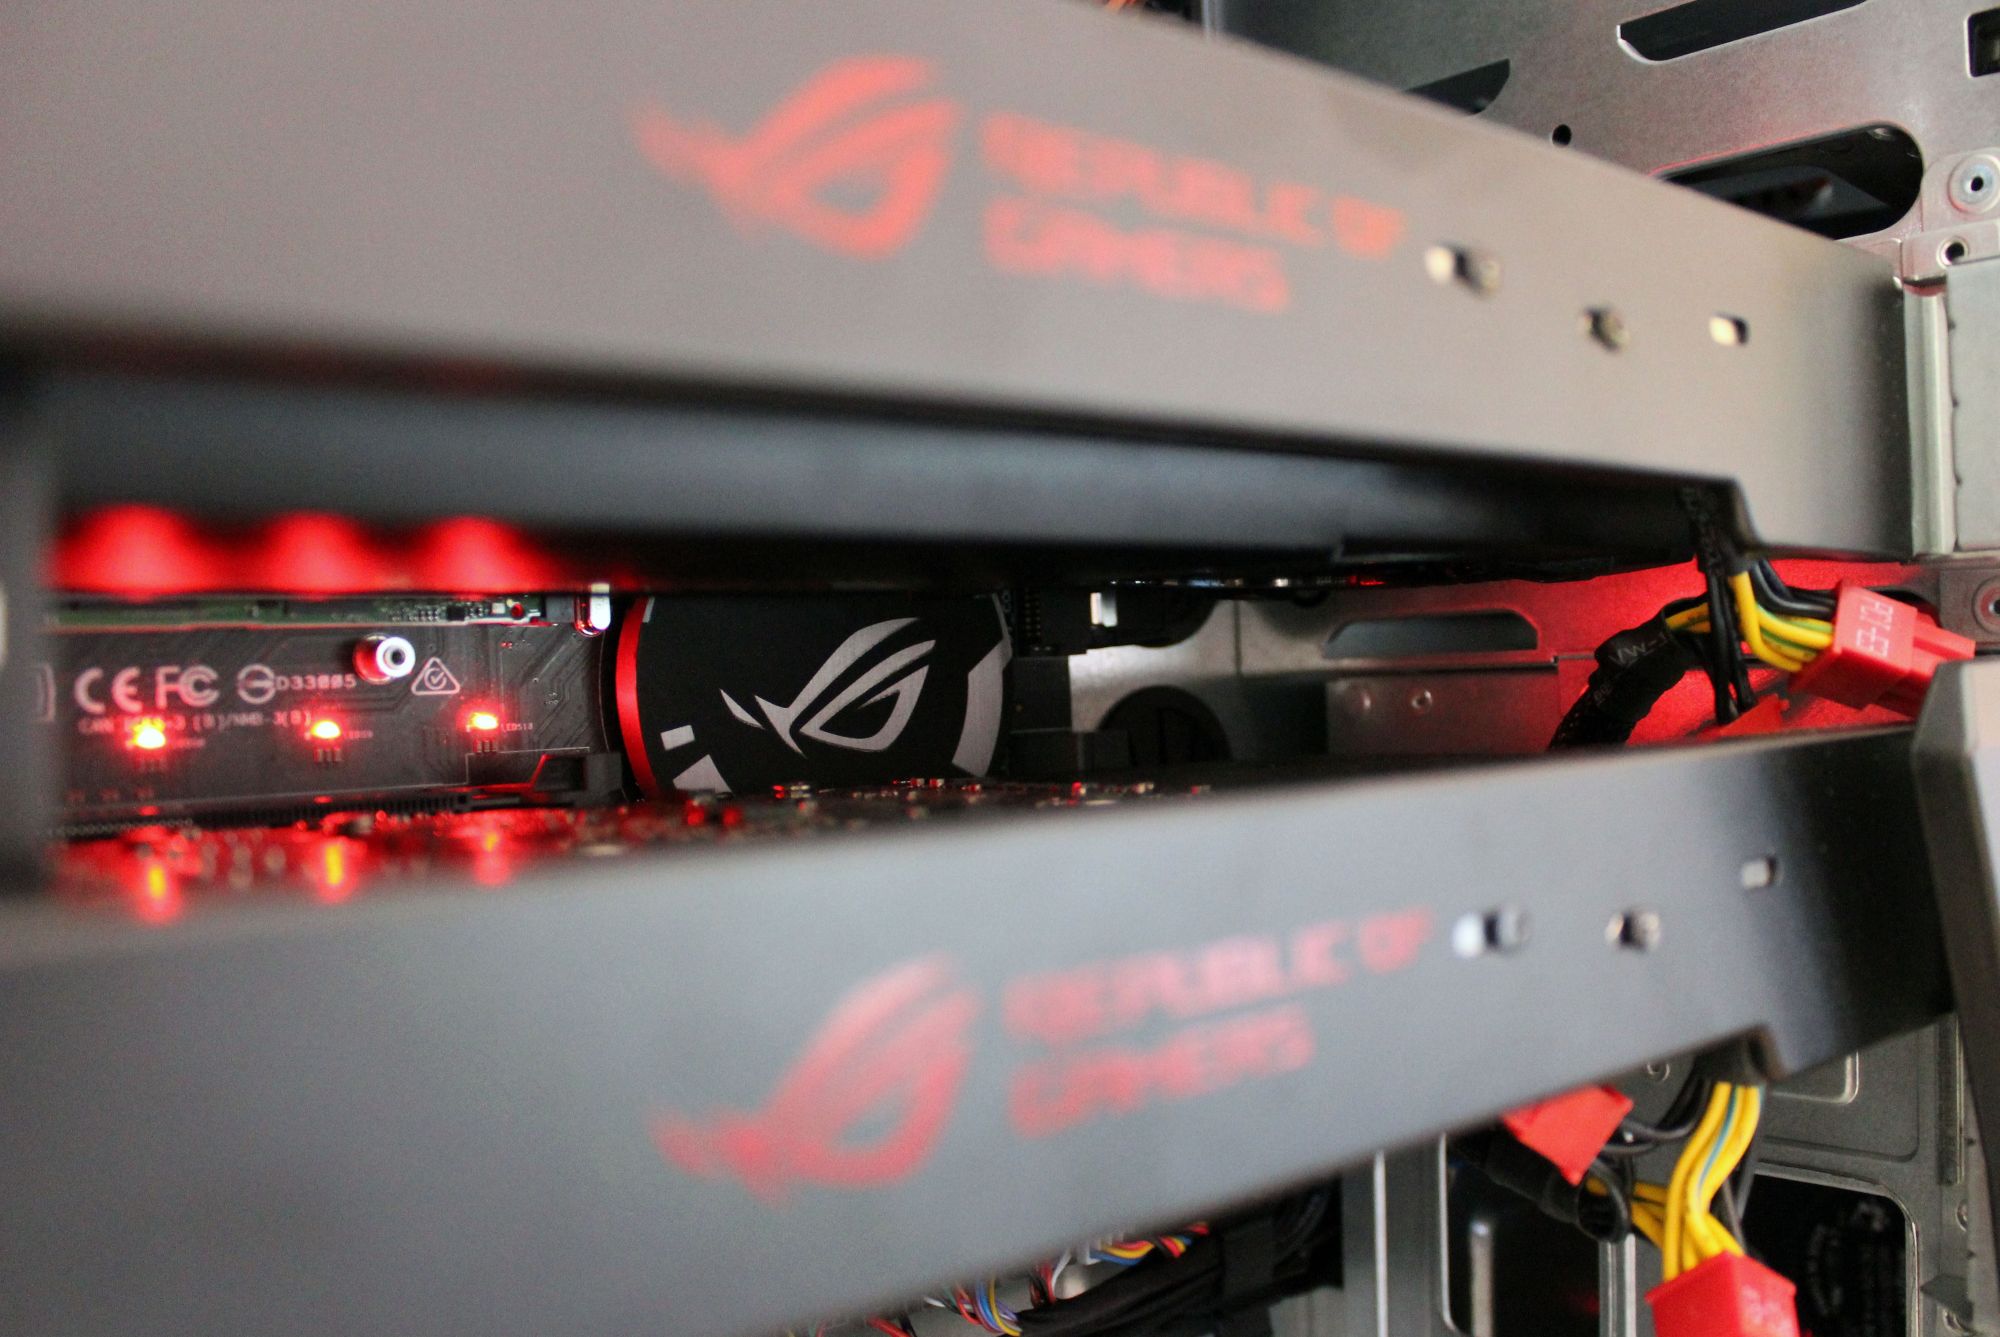 Close-up inside Asus ROG GT51CH gaming PC with illuminated components.